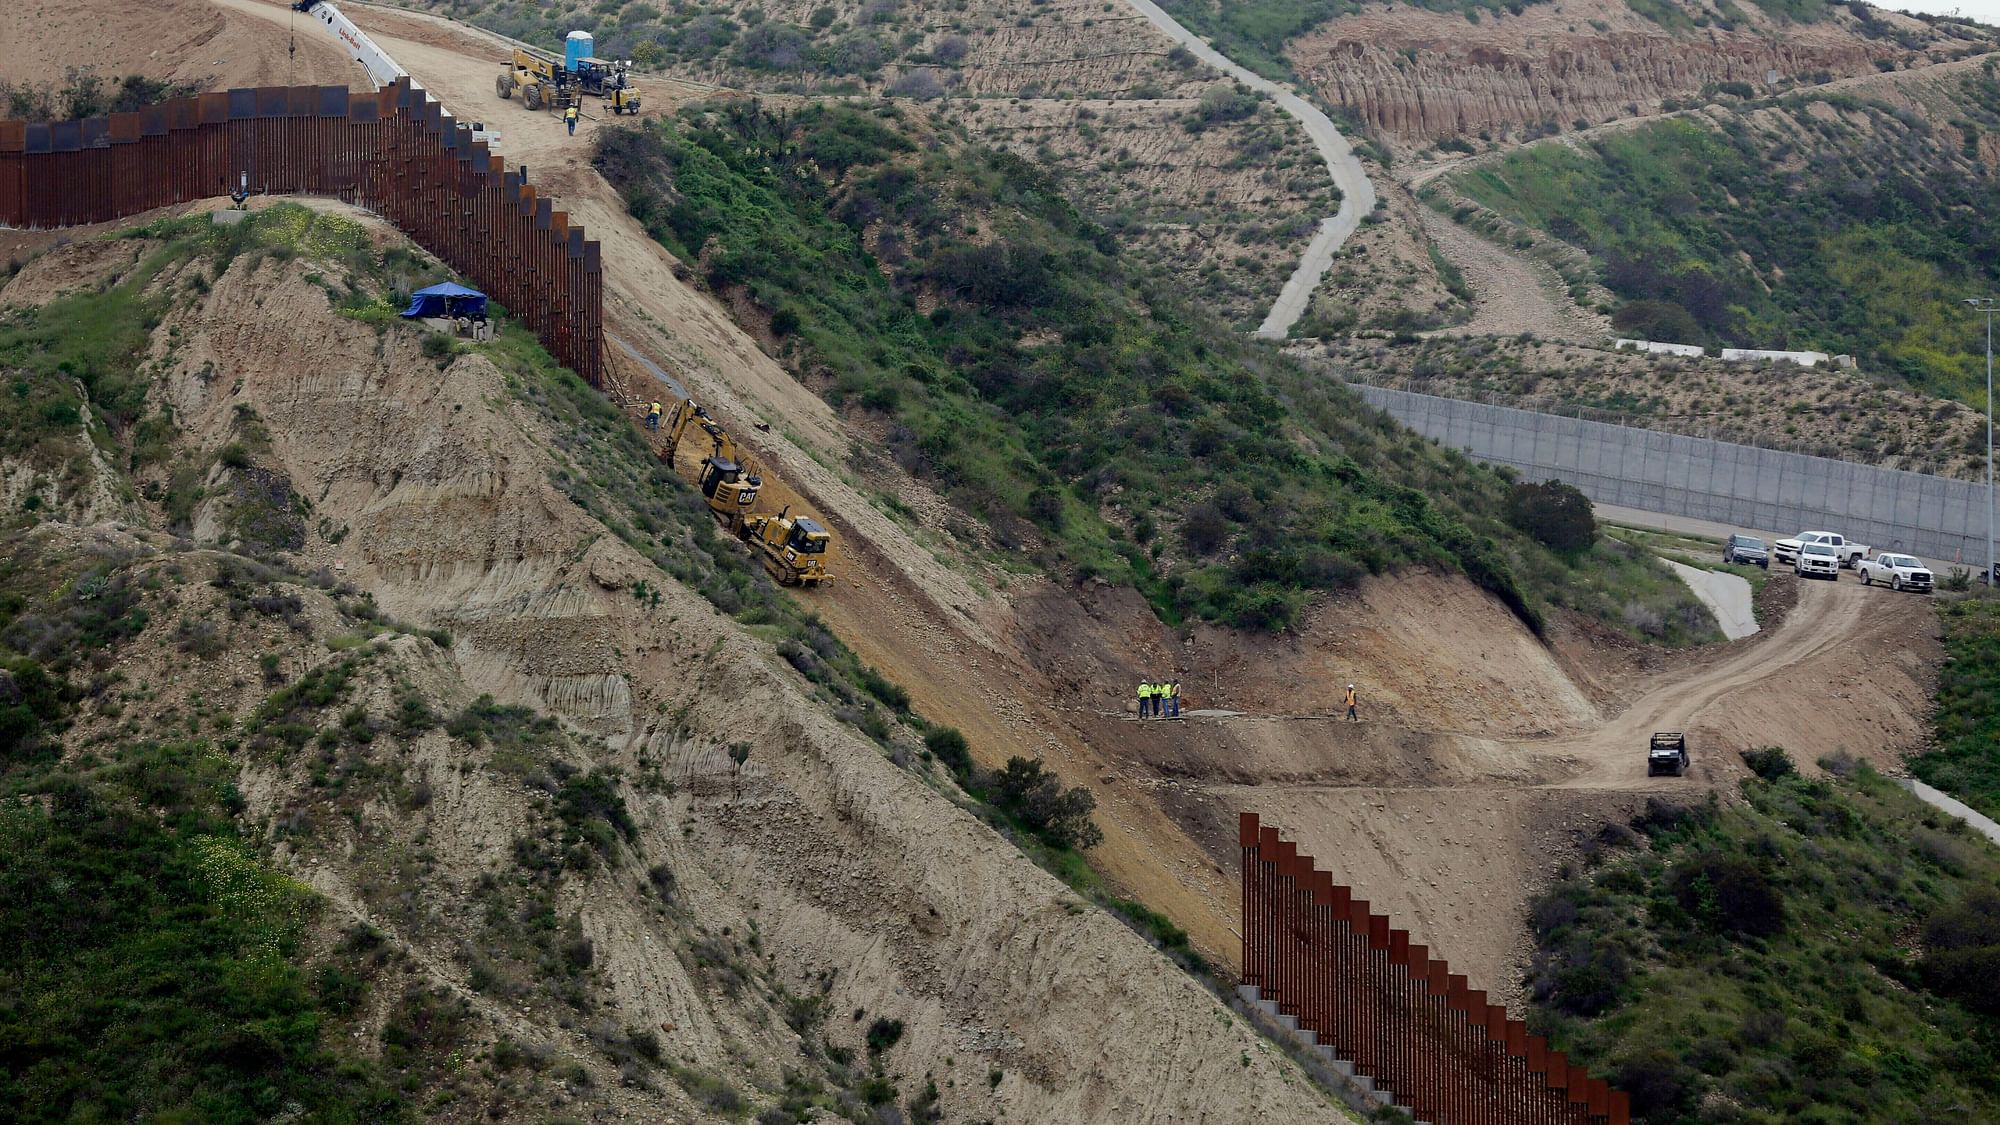 The money is to be used to build 175 miles of wall along the US-Mexico border.